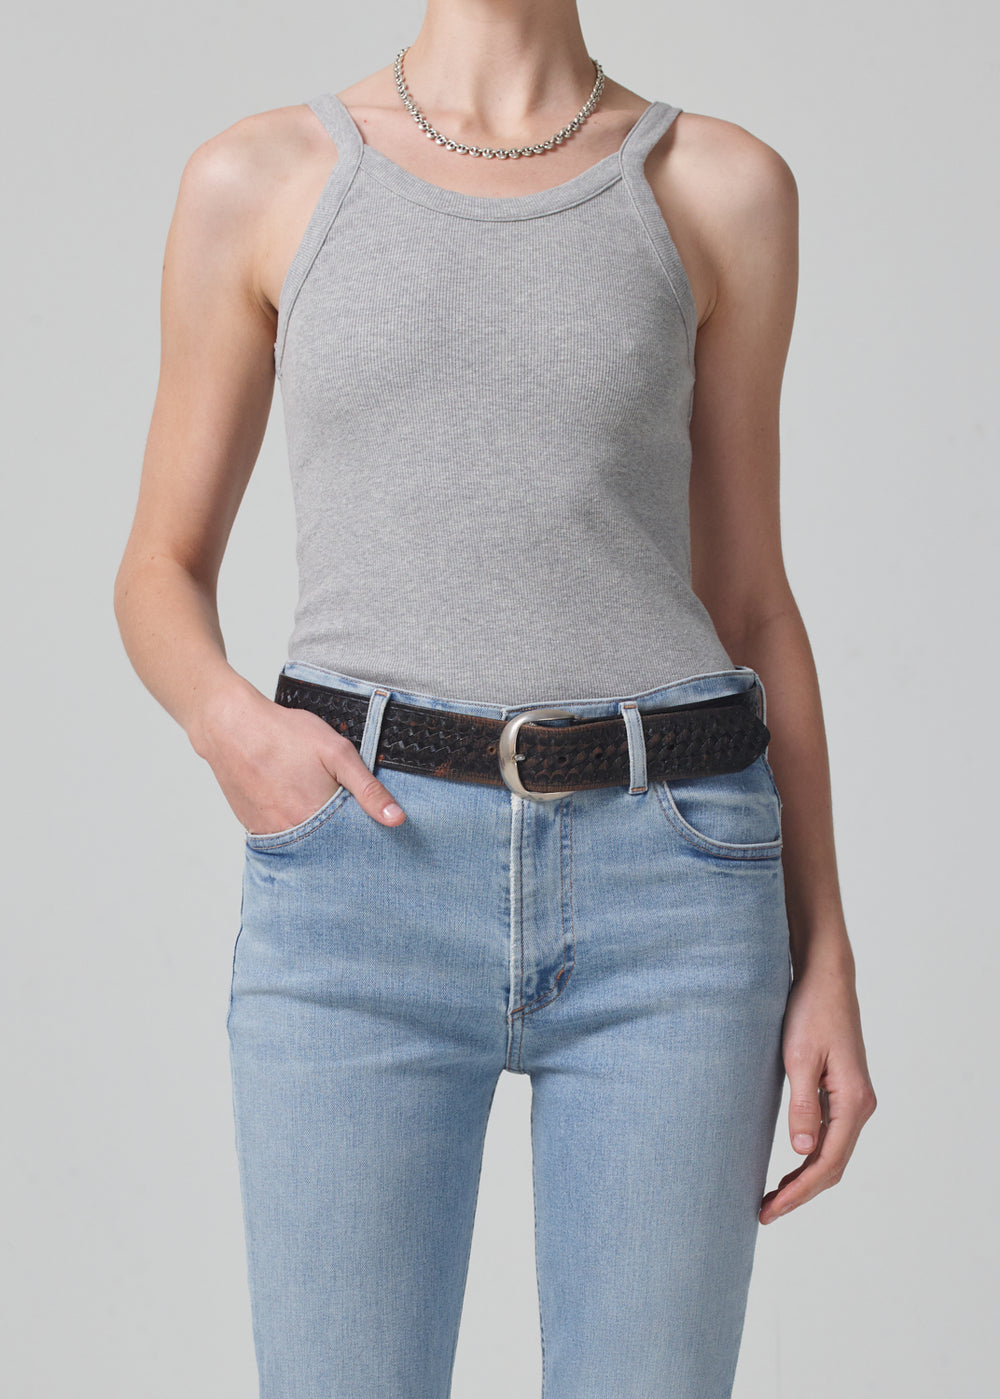 Citizens Of Humanity Katia Tank in Heather Grey available at TNT The New Trend Australia